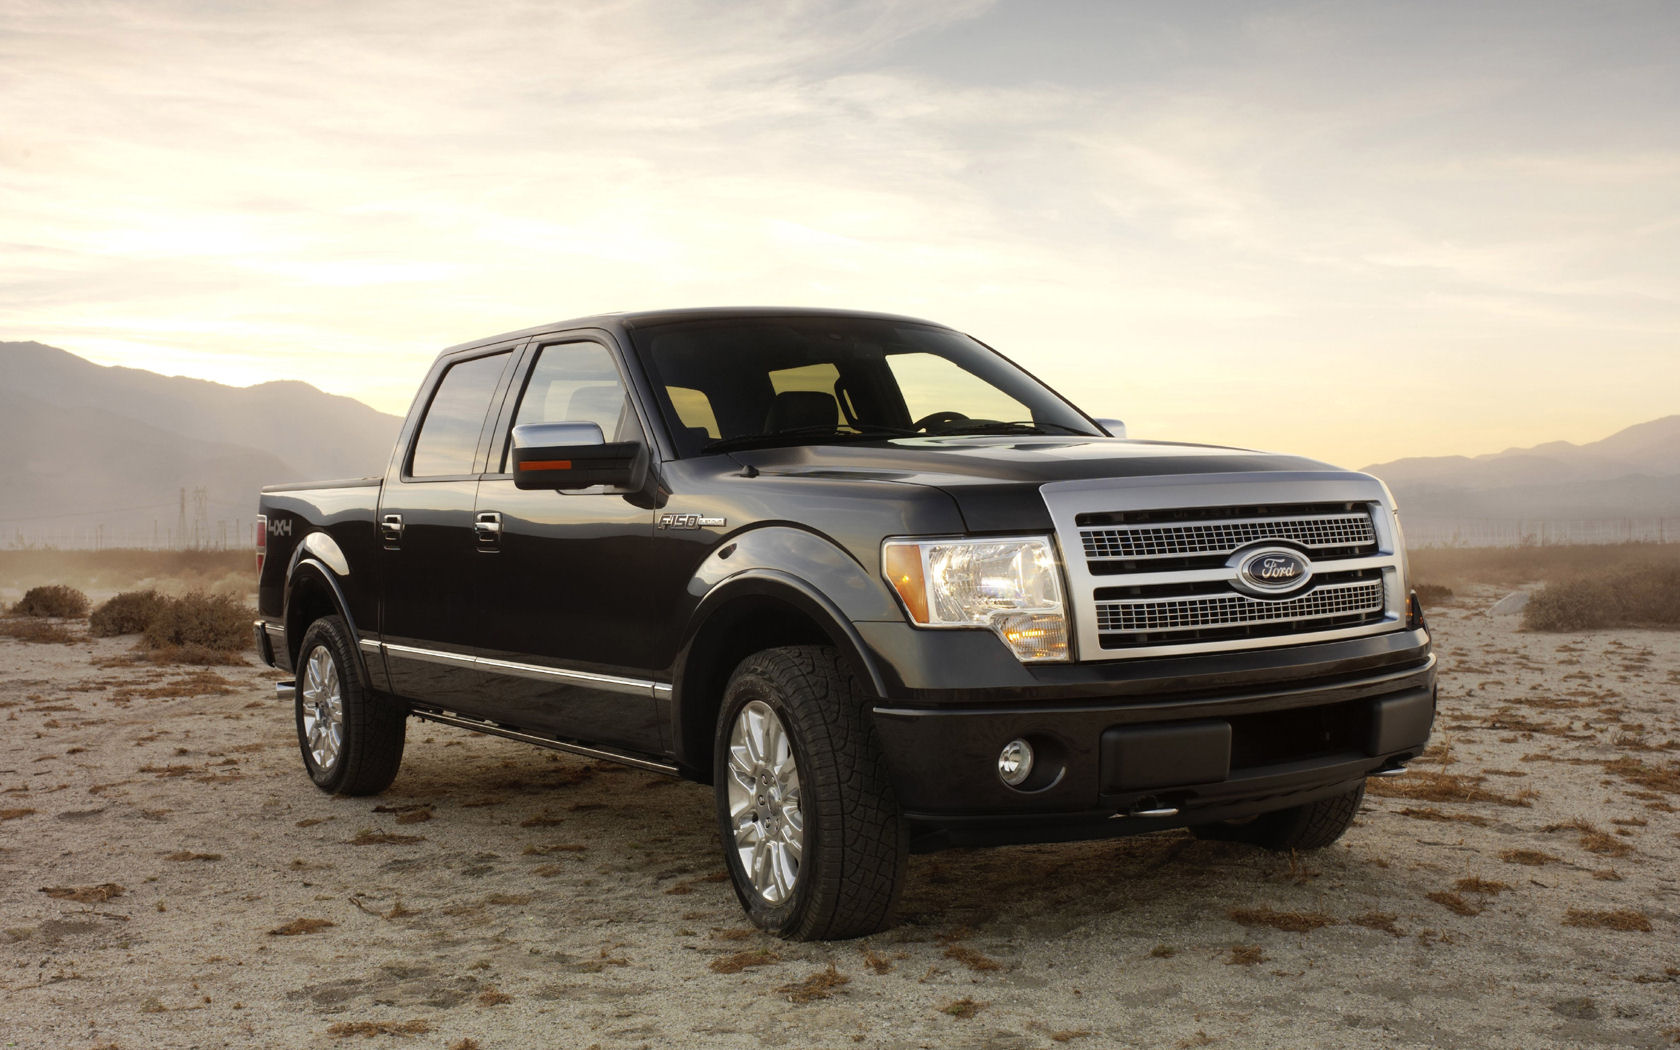 Ford Ford F150 Ford F150 Desktop Wallpapers Widescreen Wallpaper